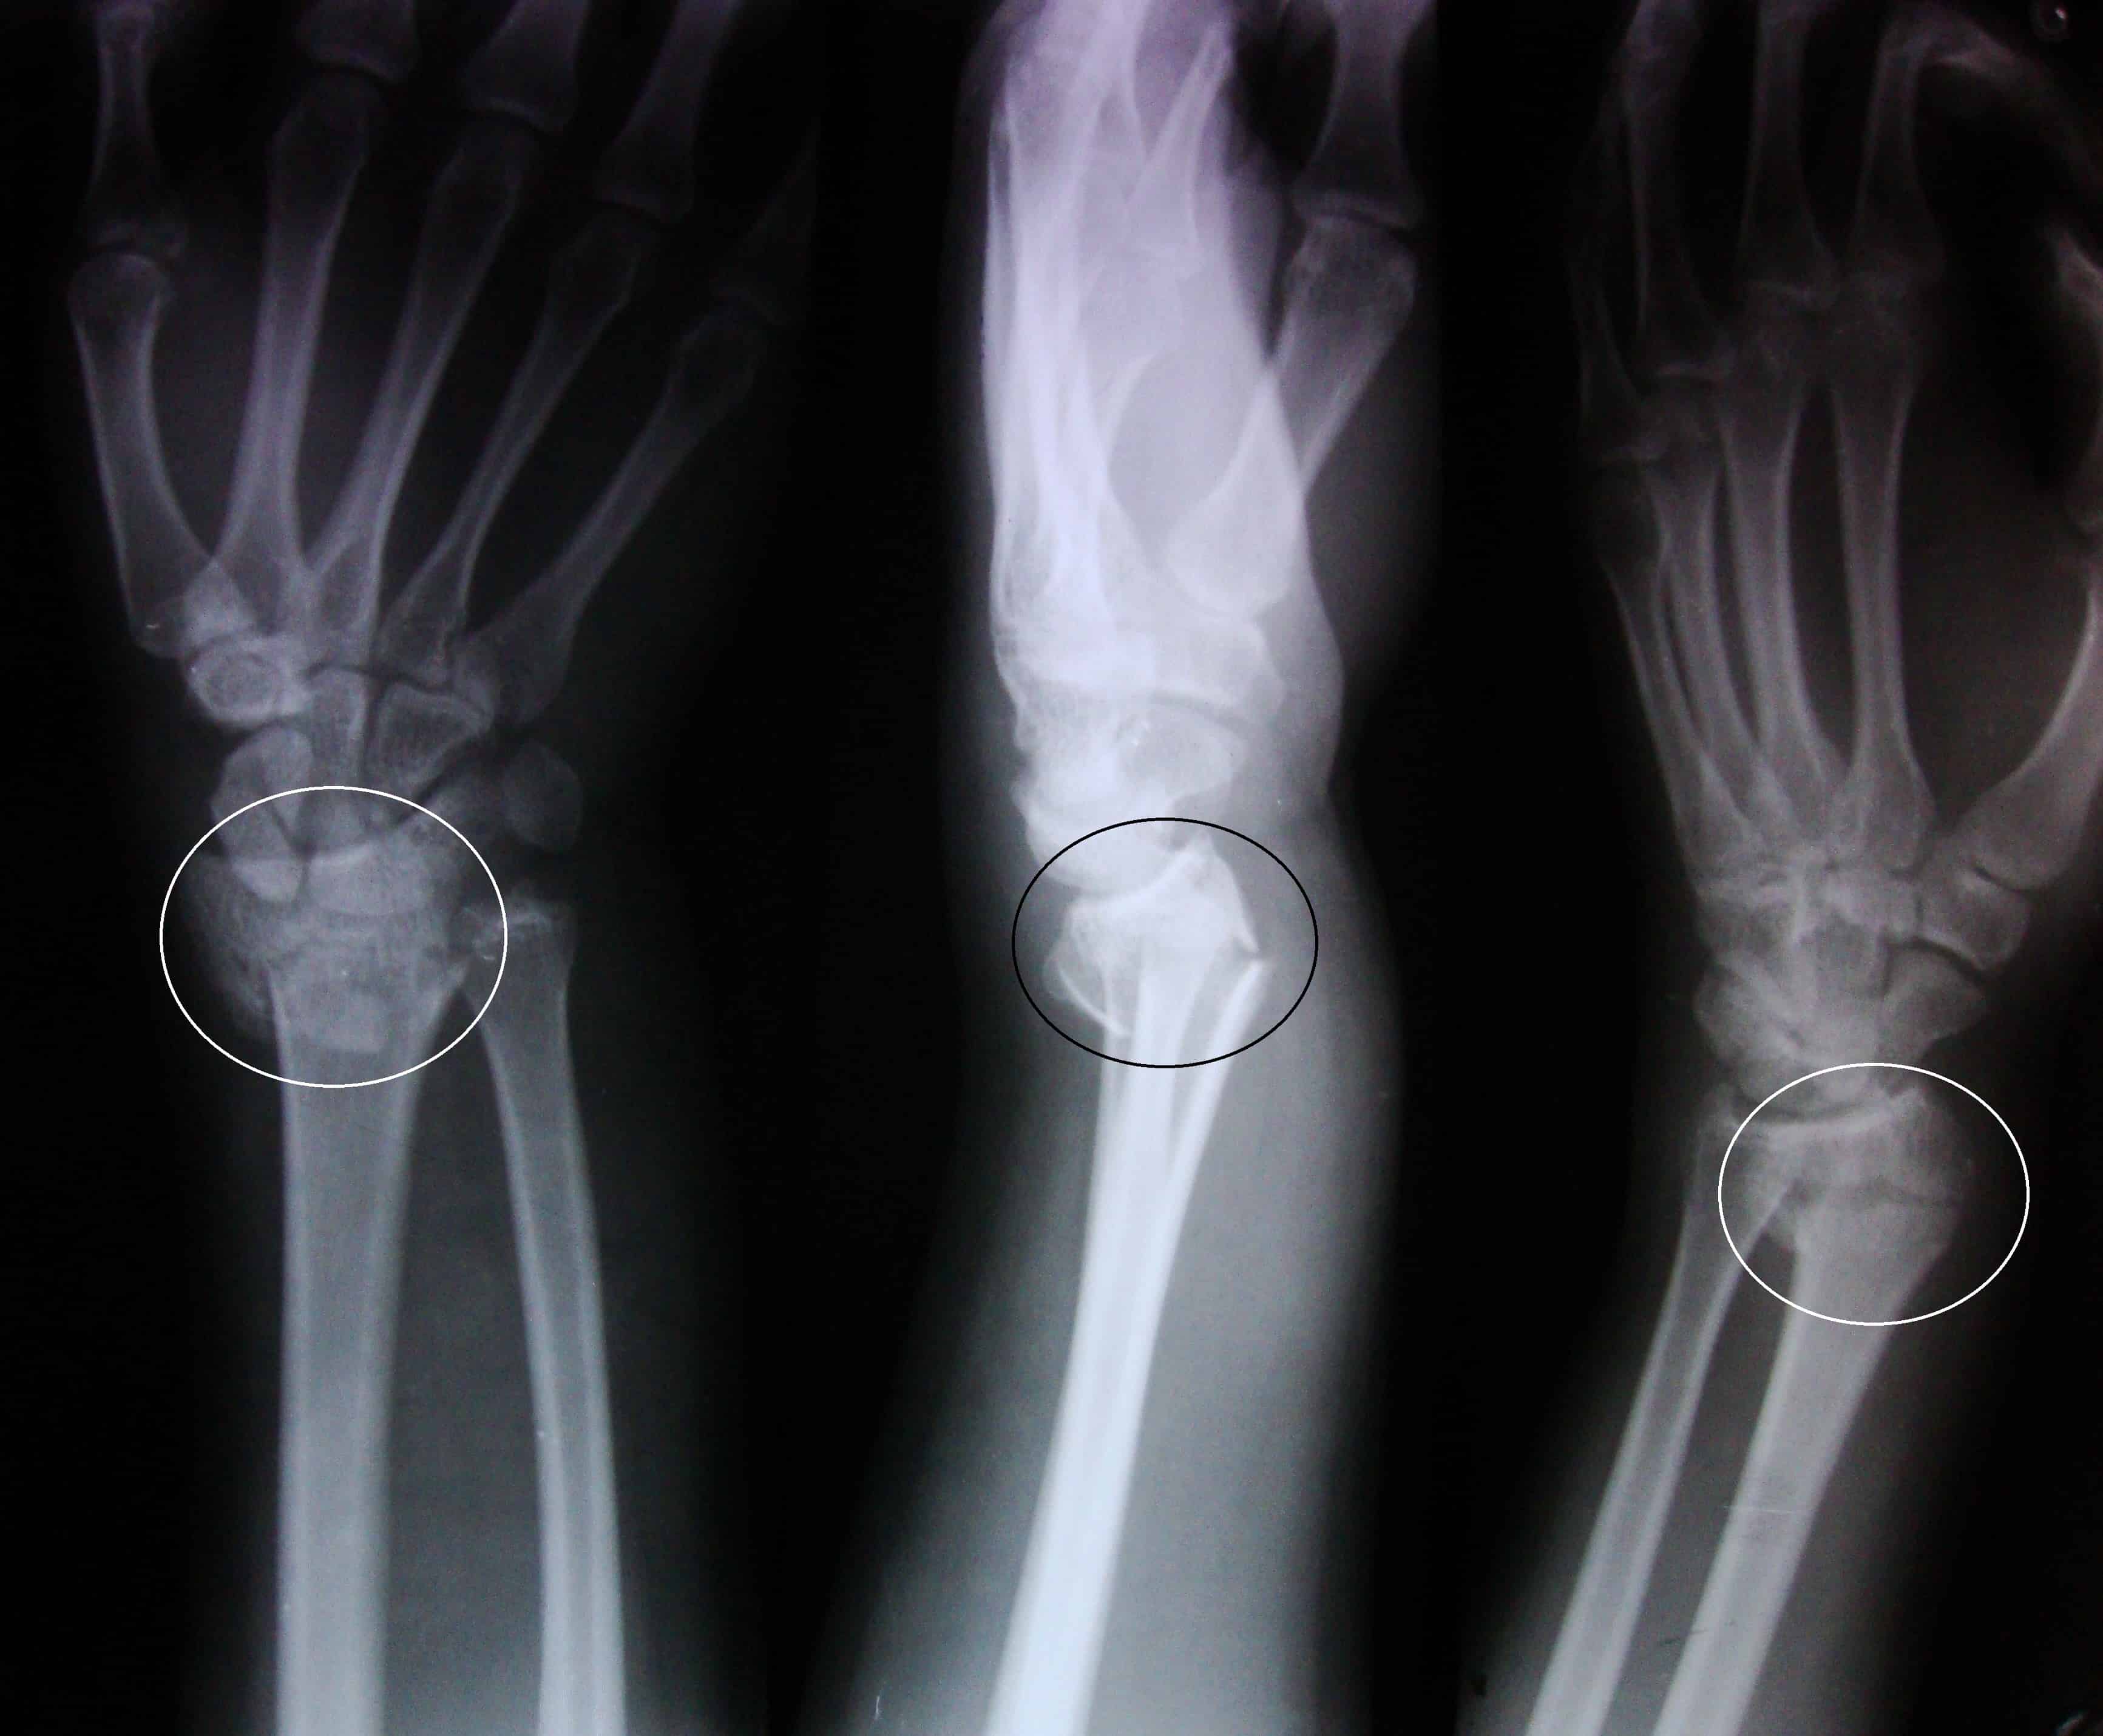 Colles fracture X-ray